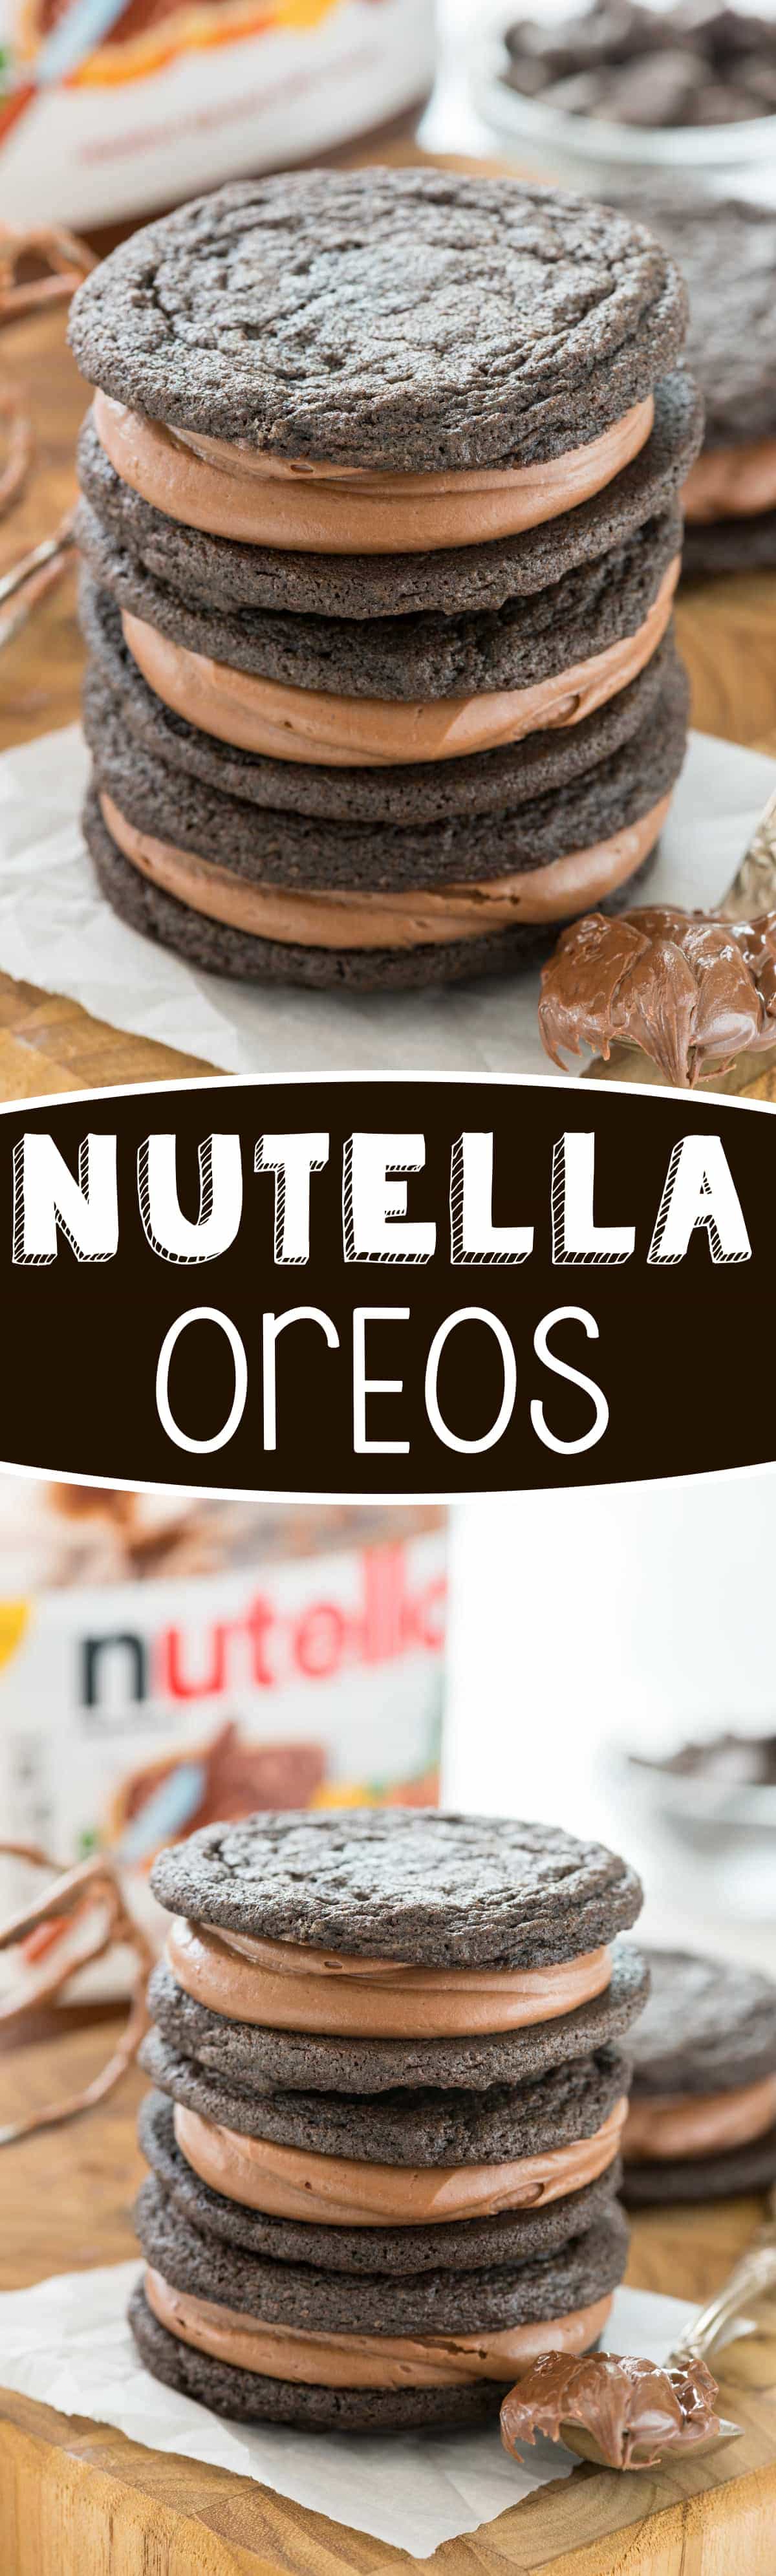 Homemade Nutella Oreos - this easy cookie recipe tastes JUST like an Oreo! Filled with the BEST Nutella frosting recipe, they're so good we couldn't stop eating them!